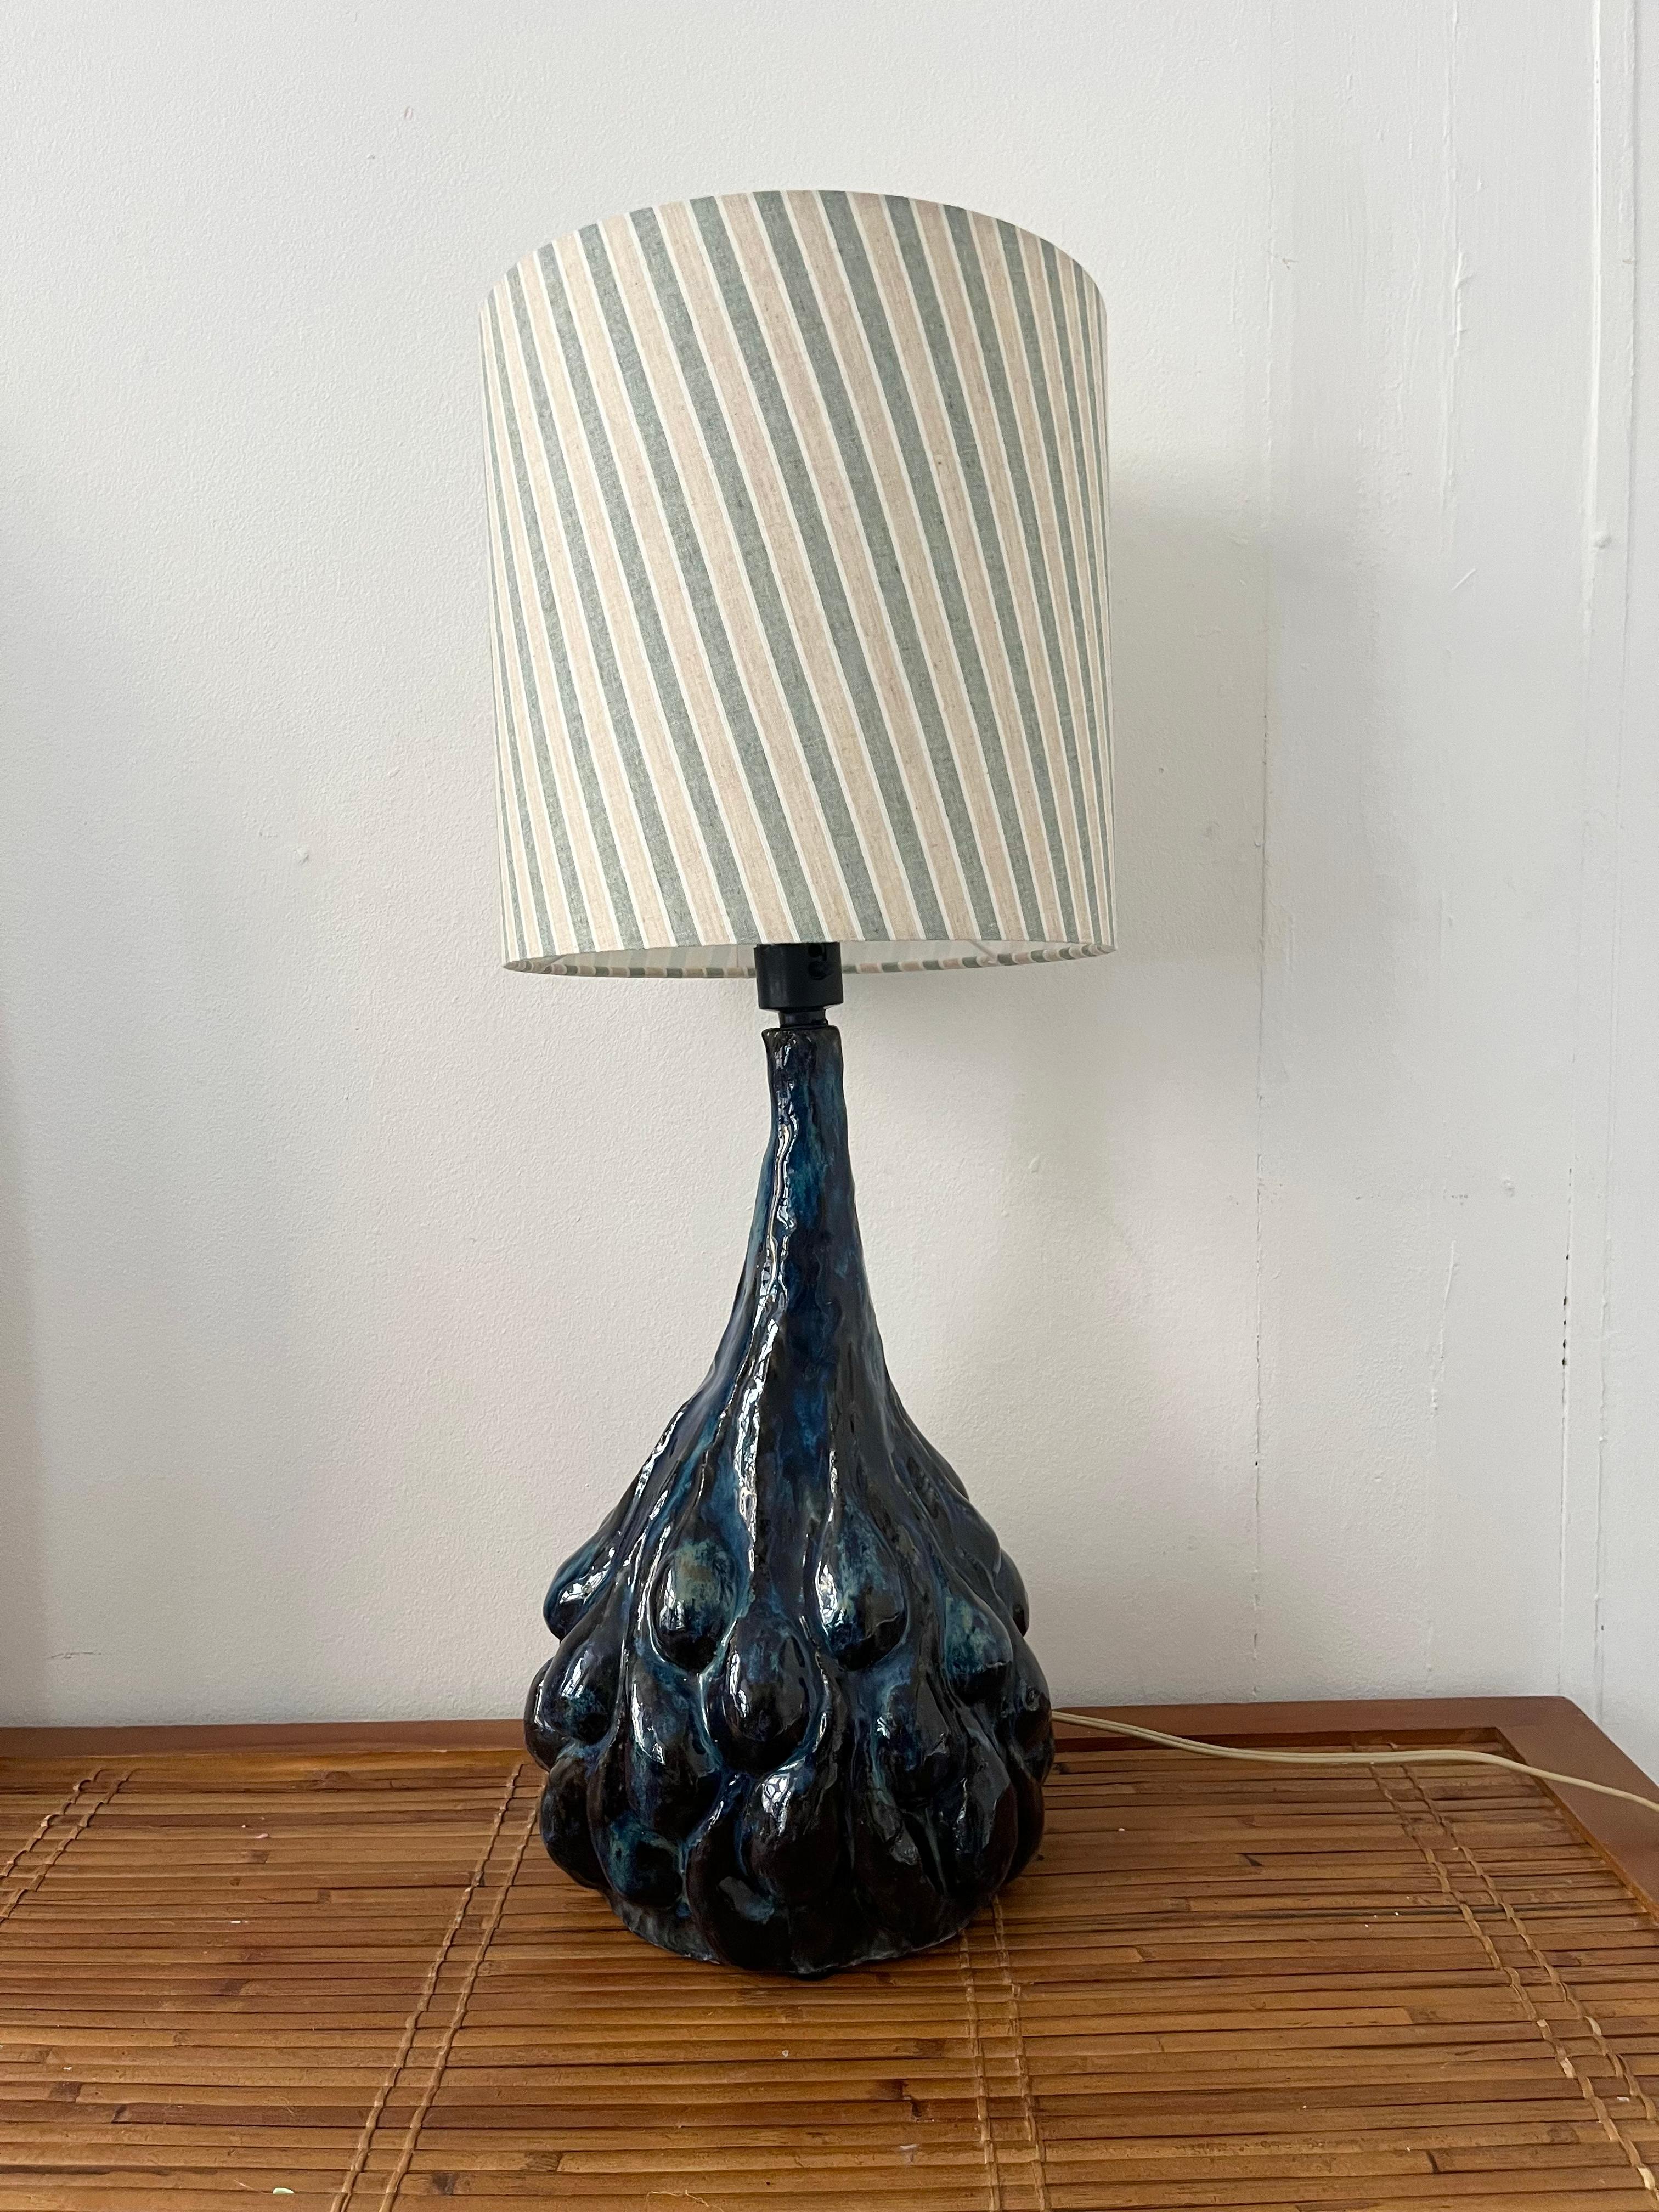 Super detailed, super decorative, this tall ceramic table lamp is both rare and impressive in size. It is handmade in shapes that is clearly inspired by Danish master Axel Salto, the glaze is glossy in nuances of blue, brown and blackish brown.